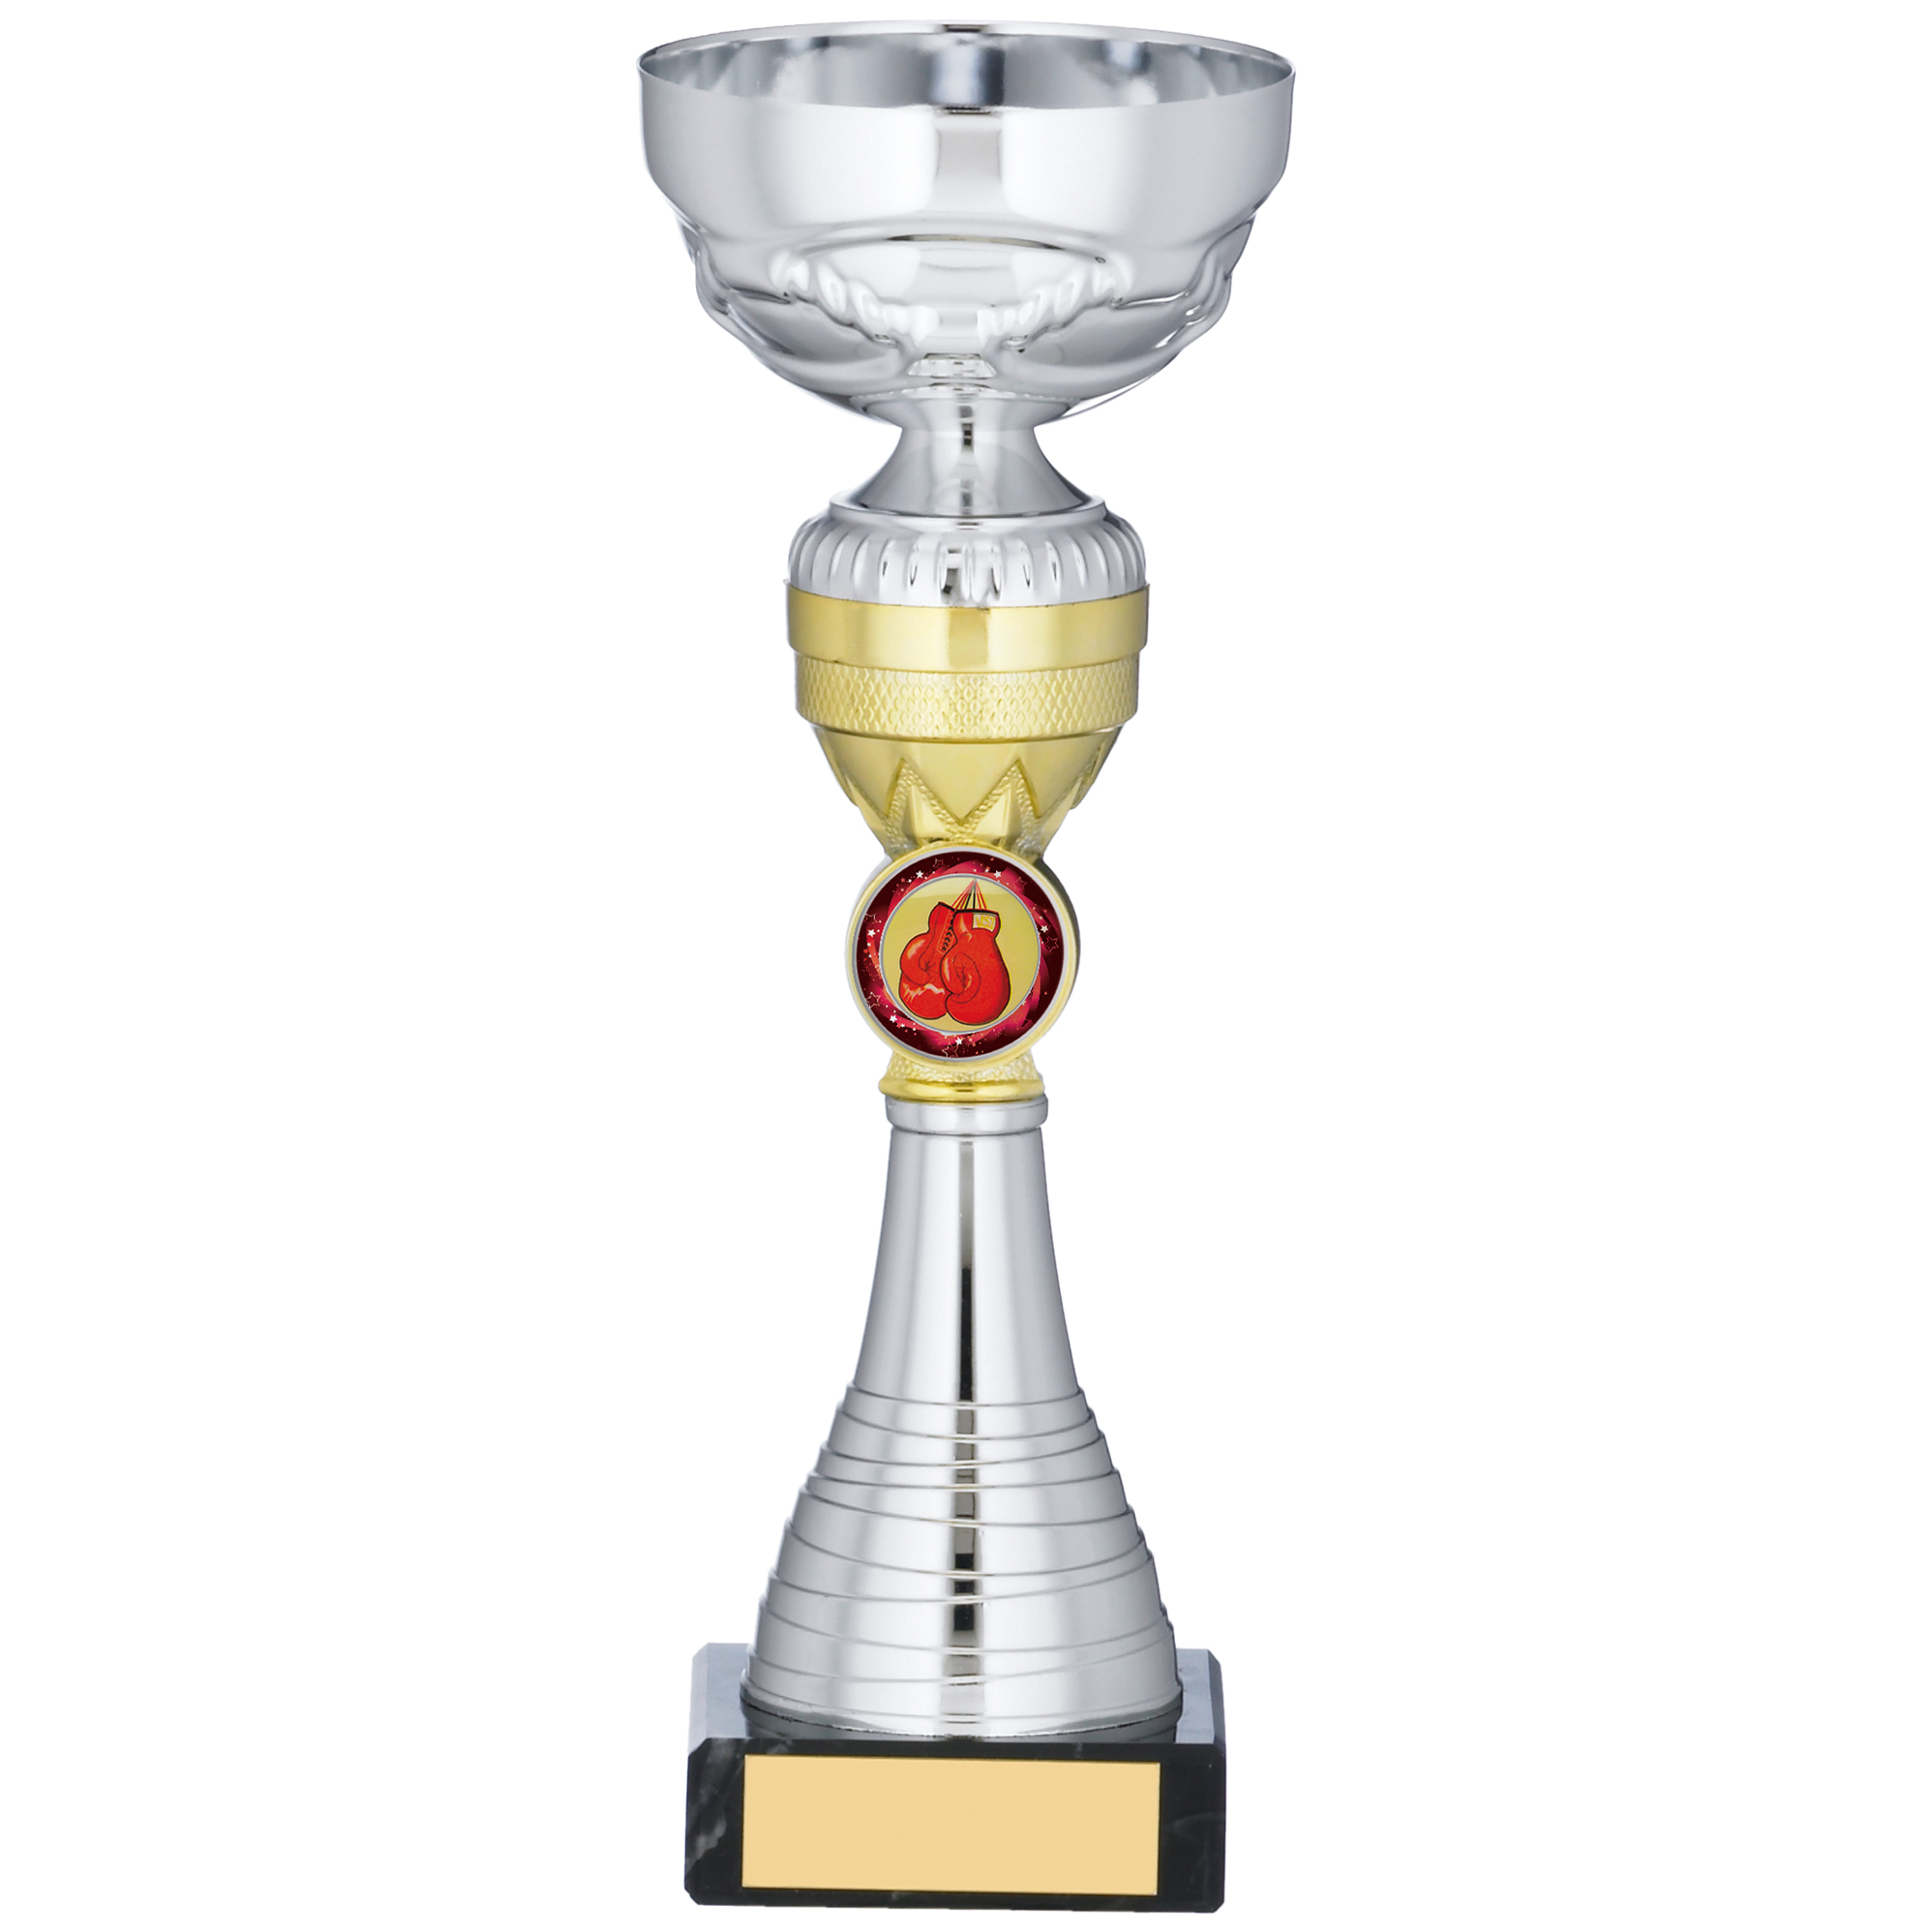 SILVER AND GOLD TROPHY